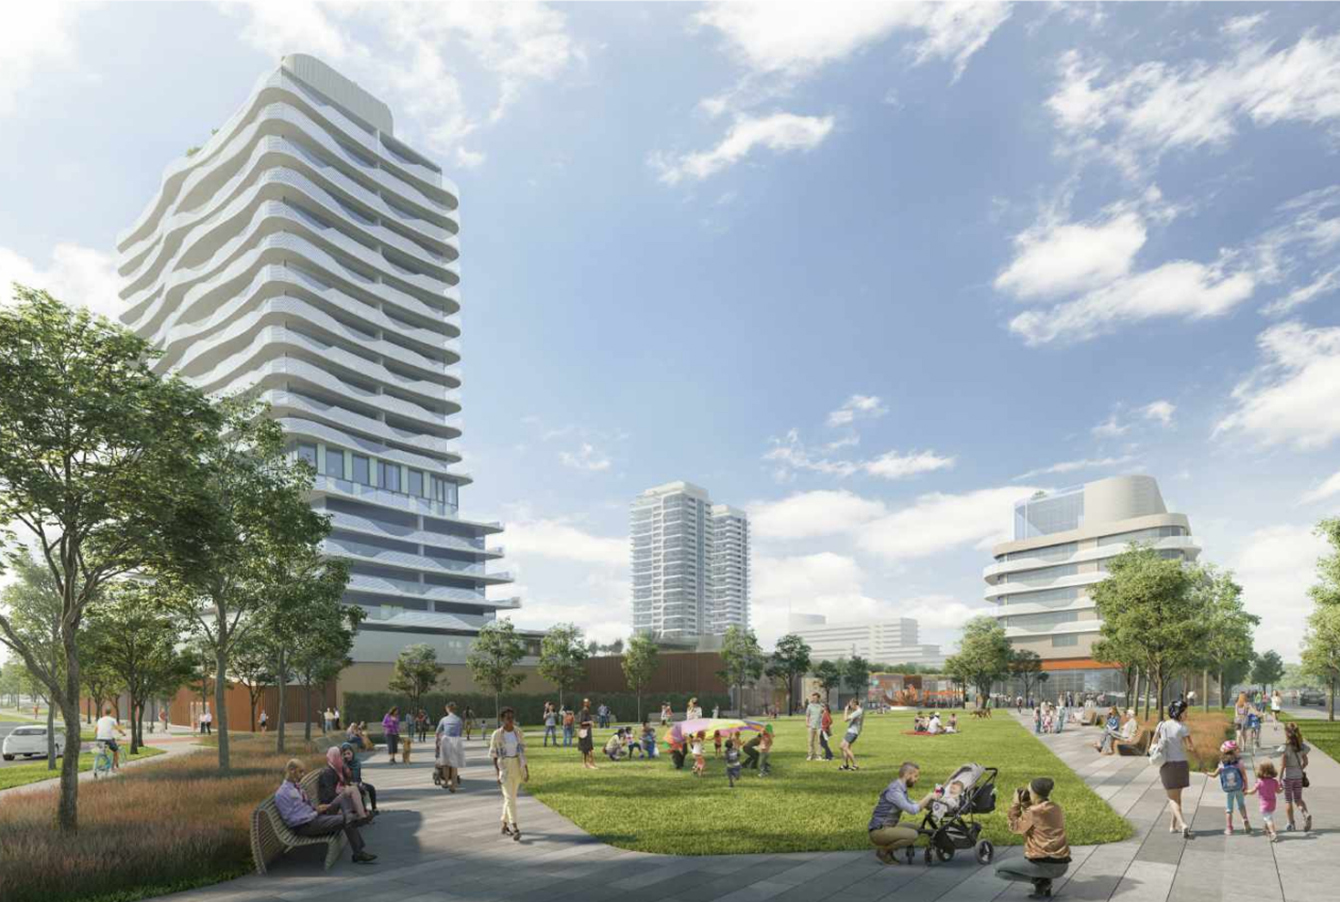 Concept image of the Bayview Village Redevelopment plans